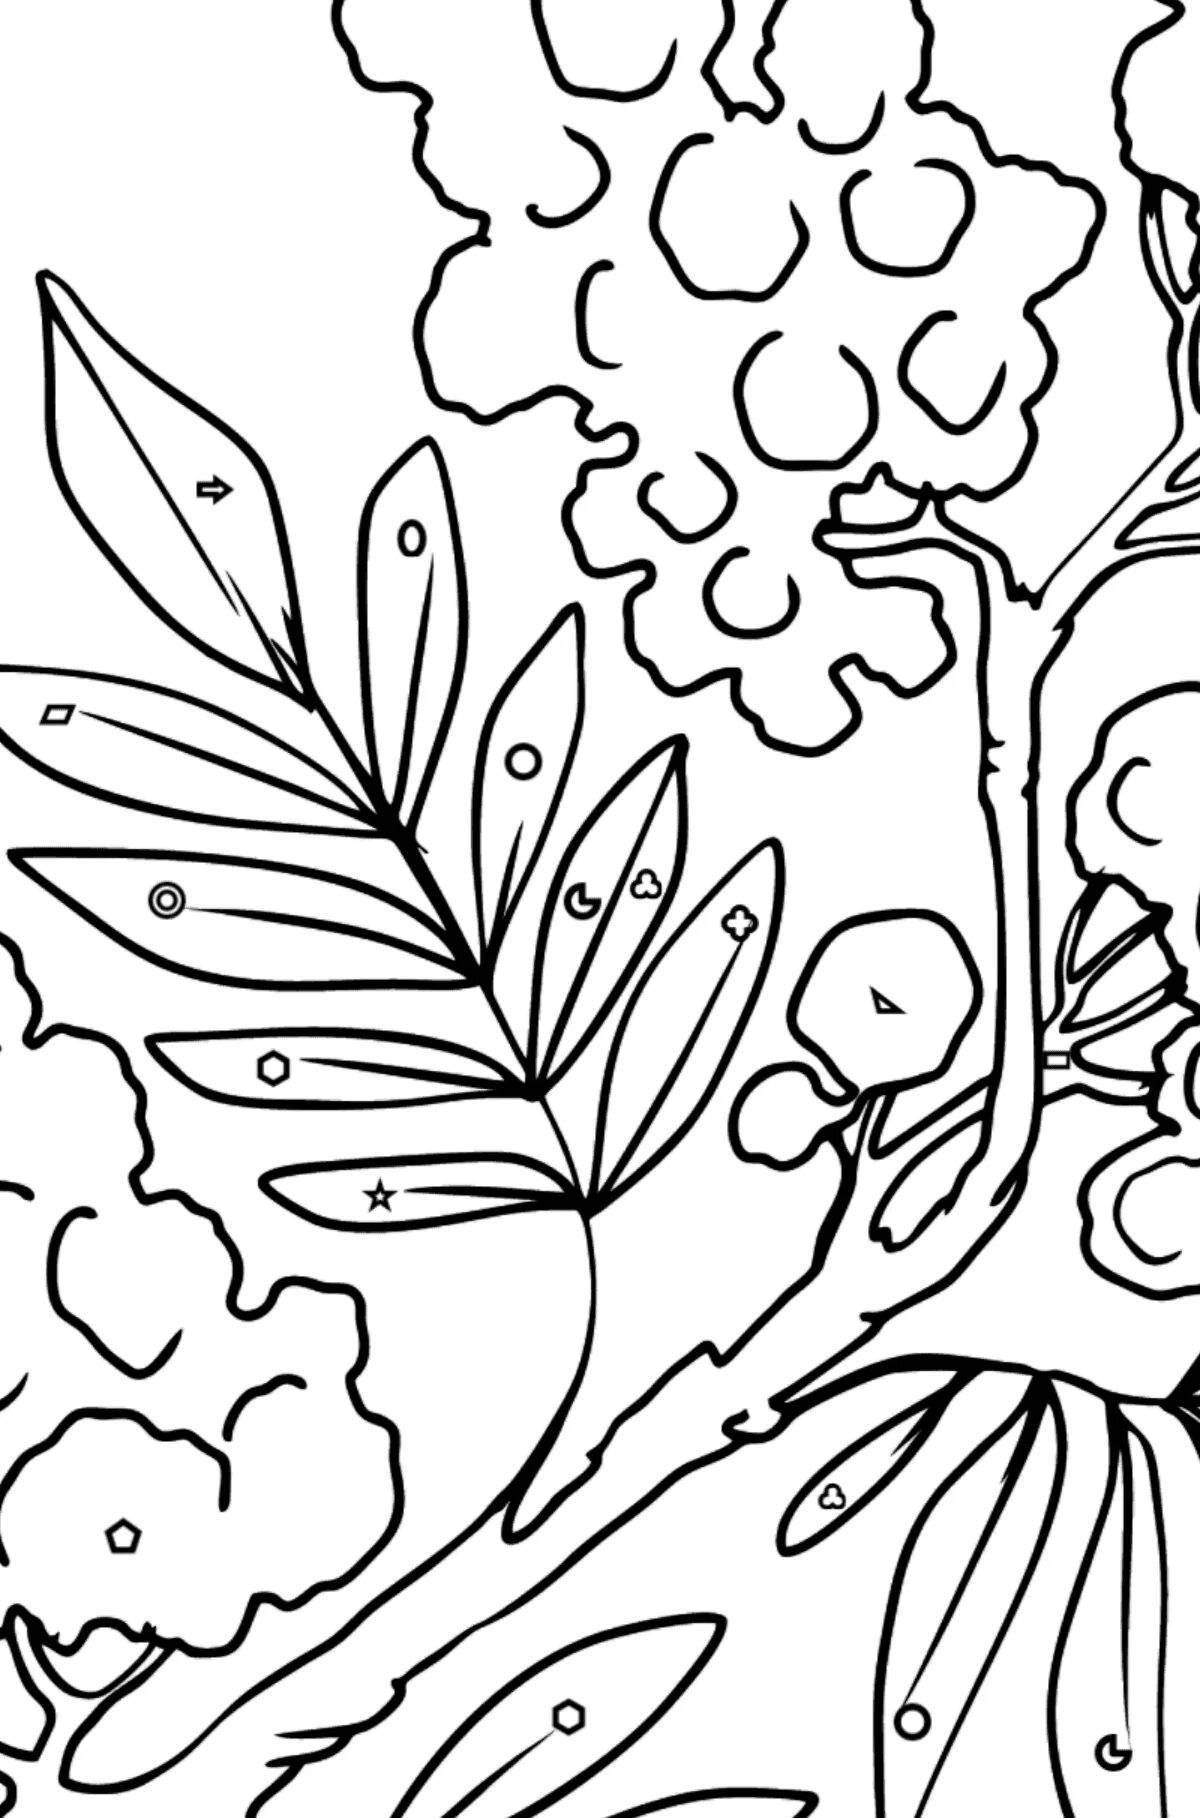 Mimosa fun coloring book for kids